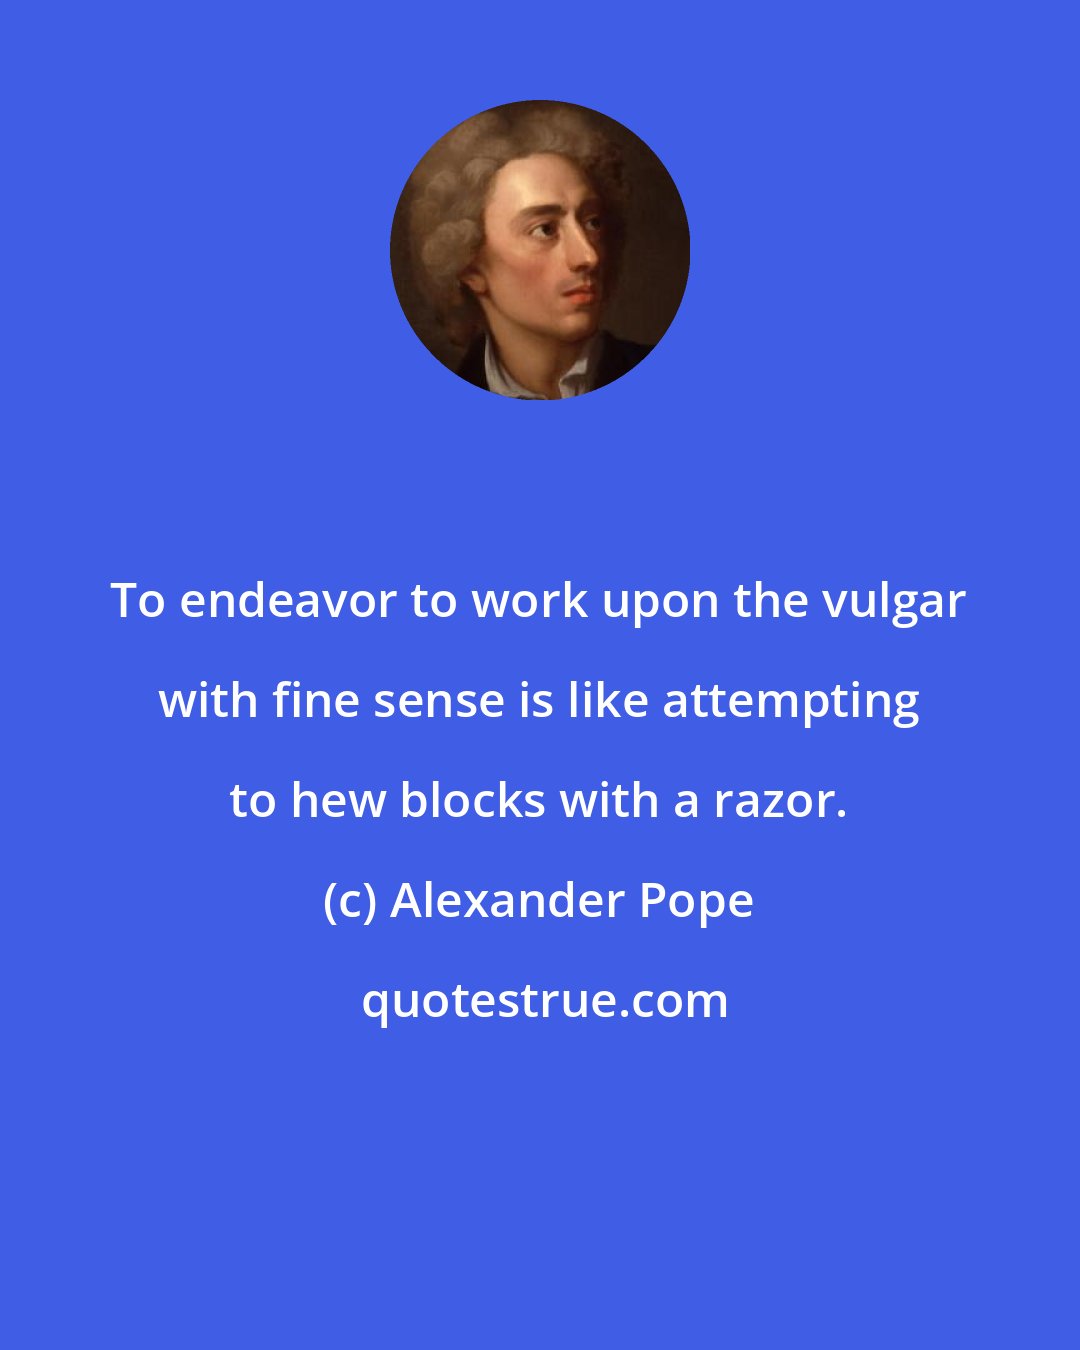 Alexander Pope: To endeavor to work upon the vulgar with fine sense is like attempting to hew blocks with a razor.